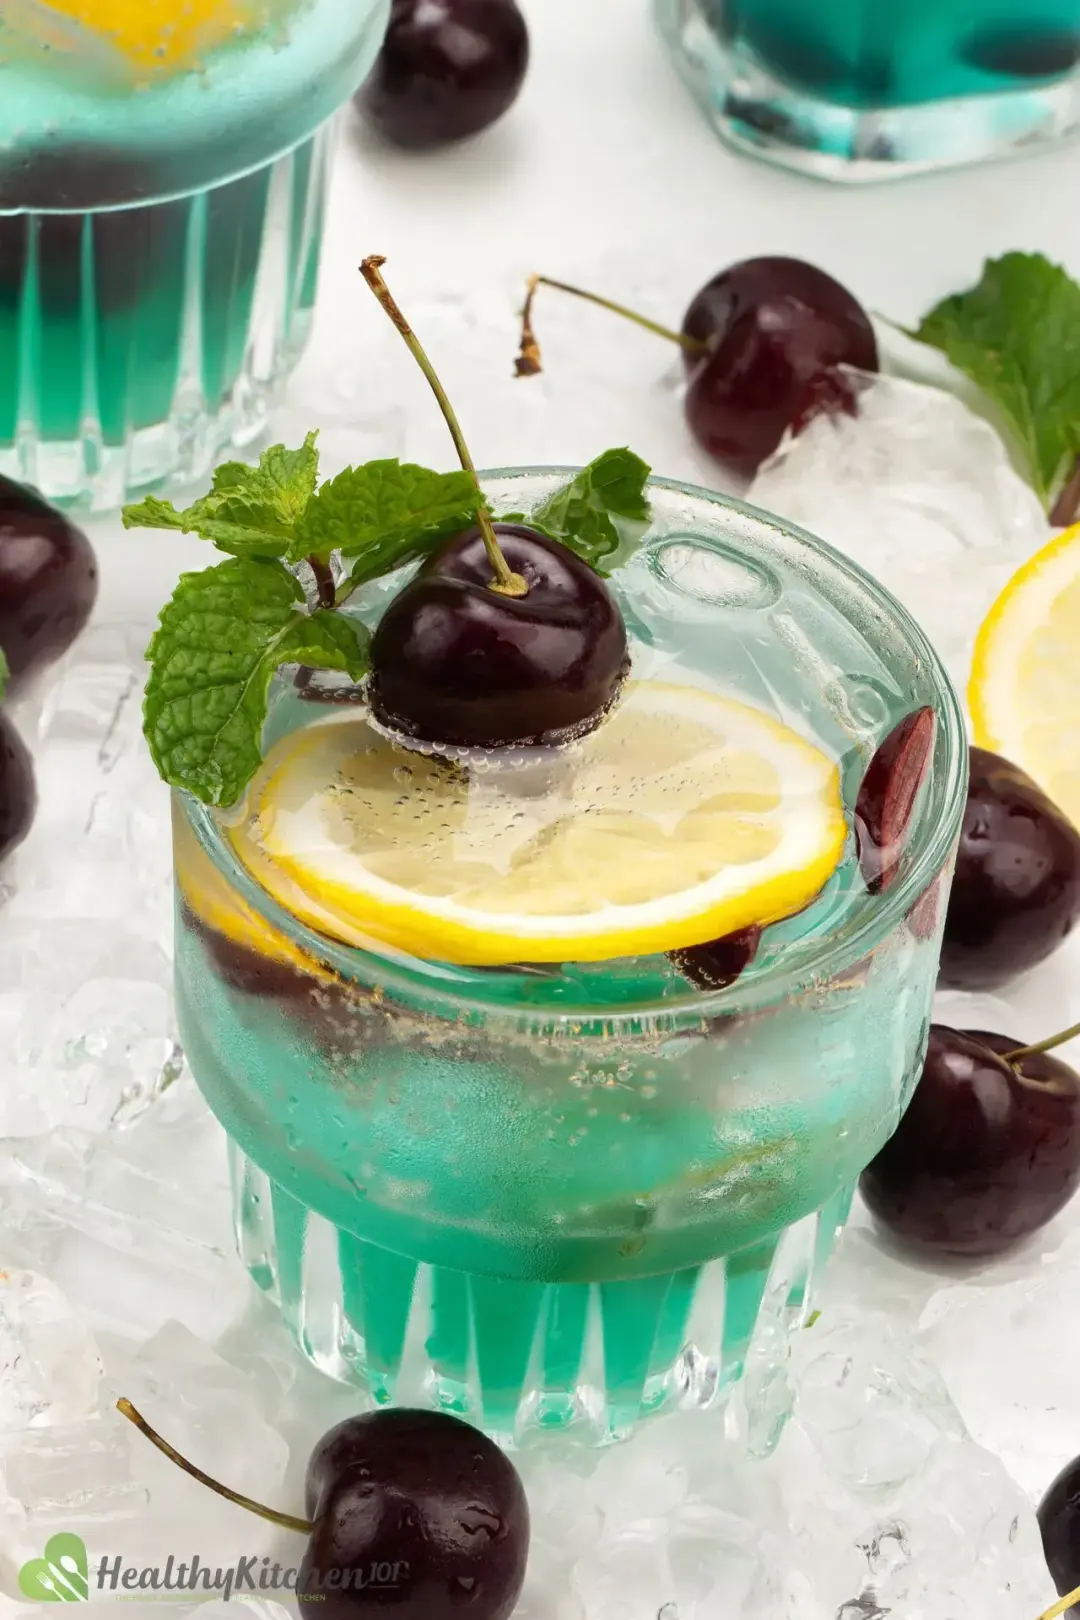 Cocktail glasses of a cyan-hued drink, topped with cherries and lemon wheels, next to scattered cherries